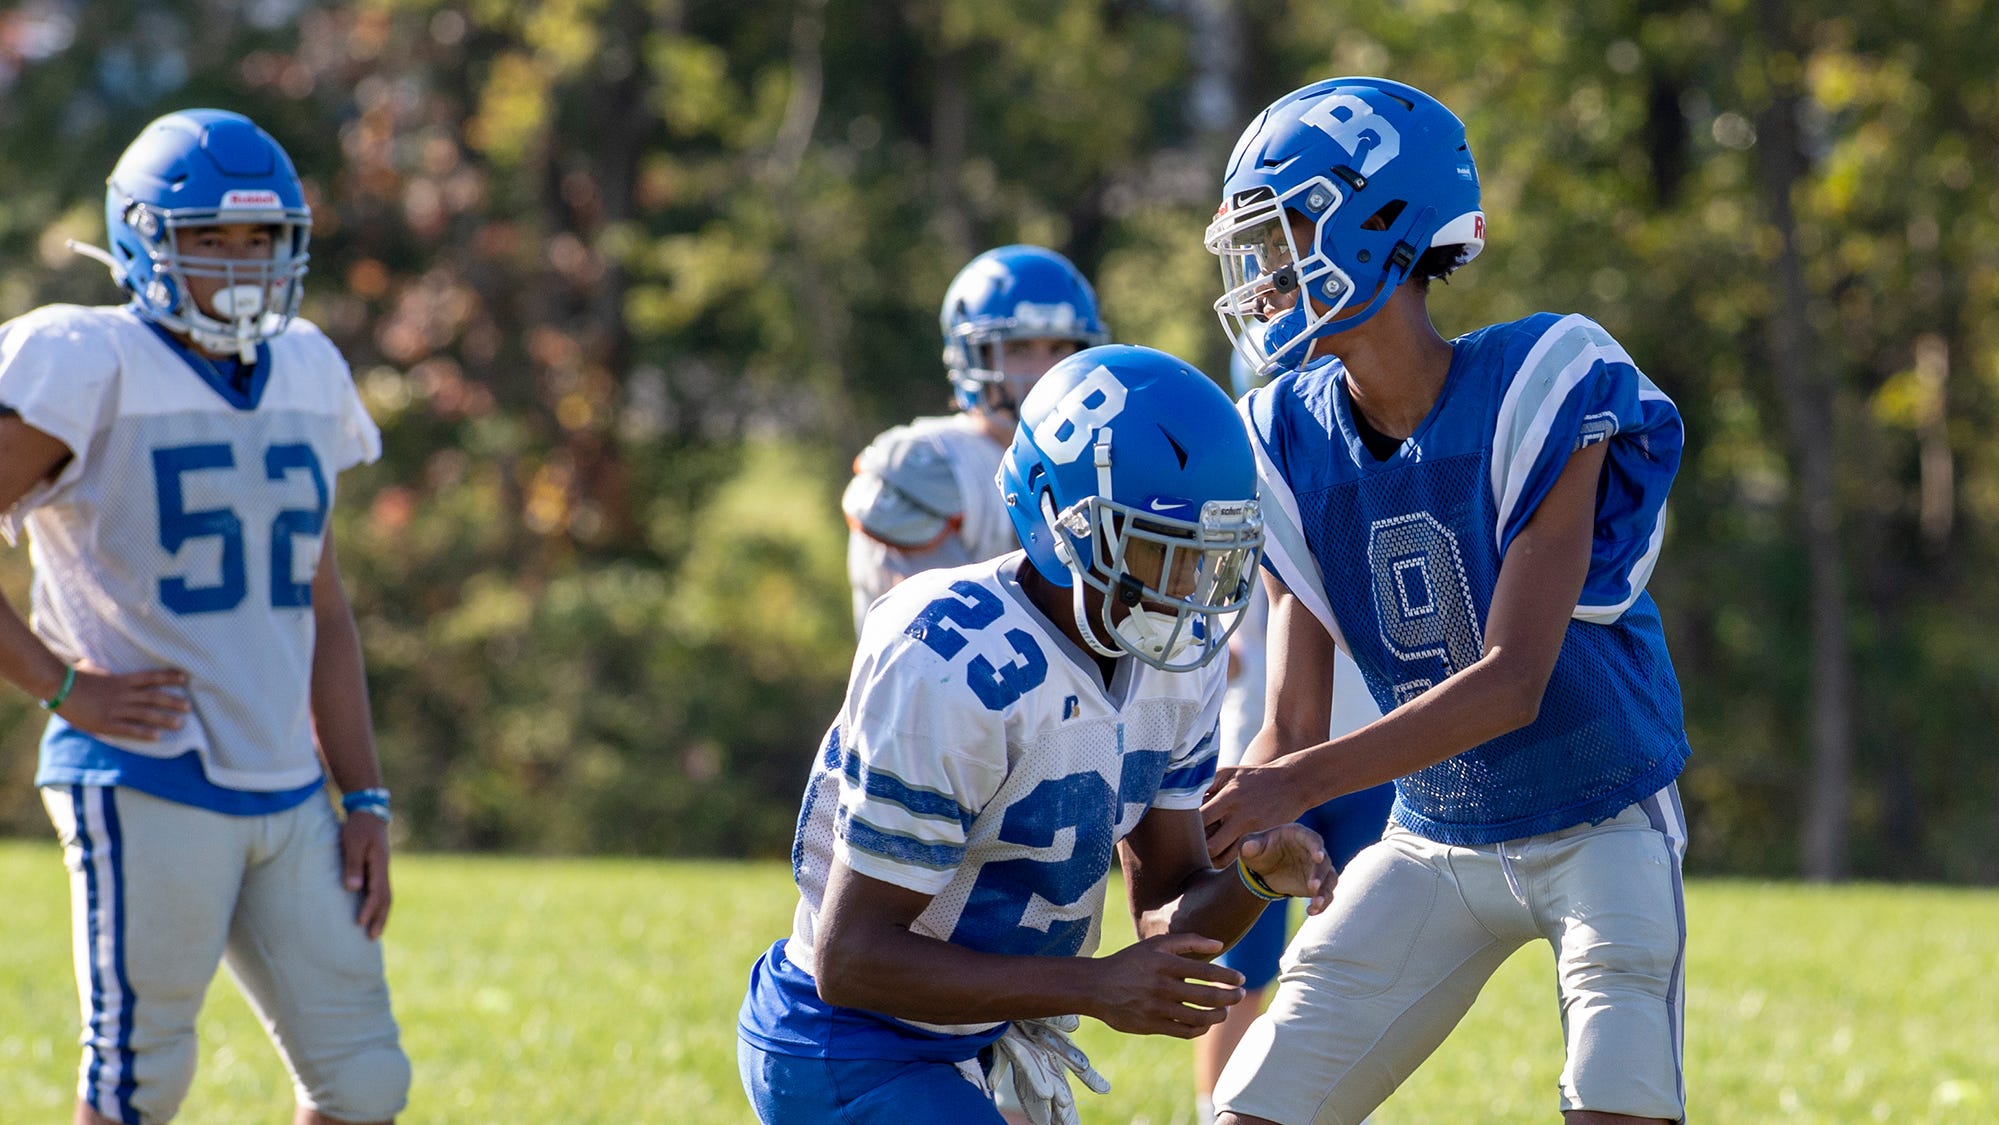 2021 SOL football preview Bensalem making fresh start with new coach